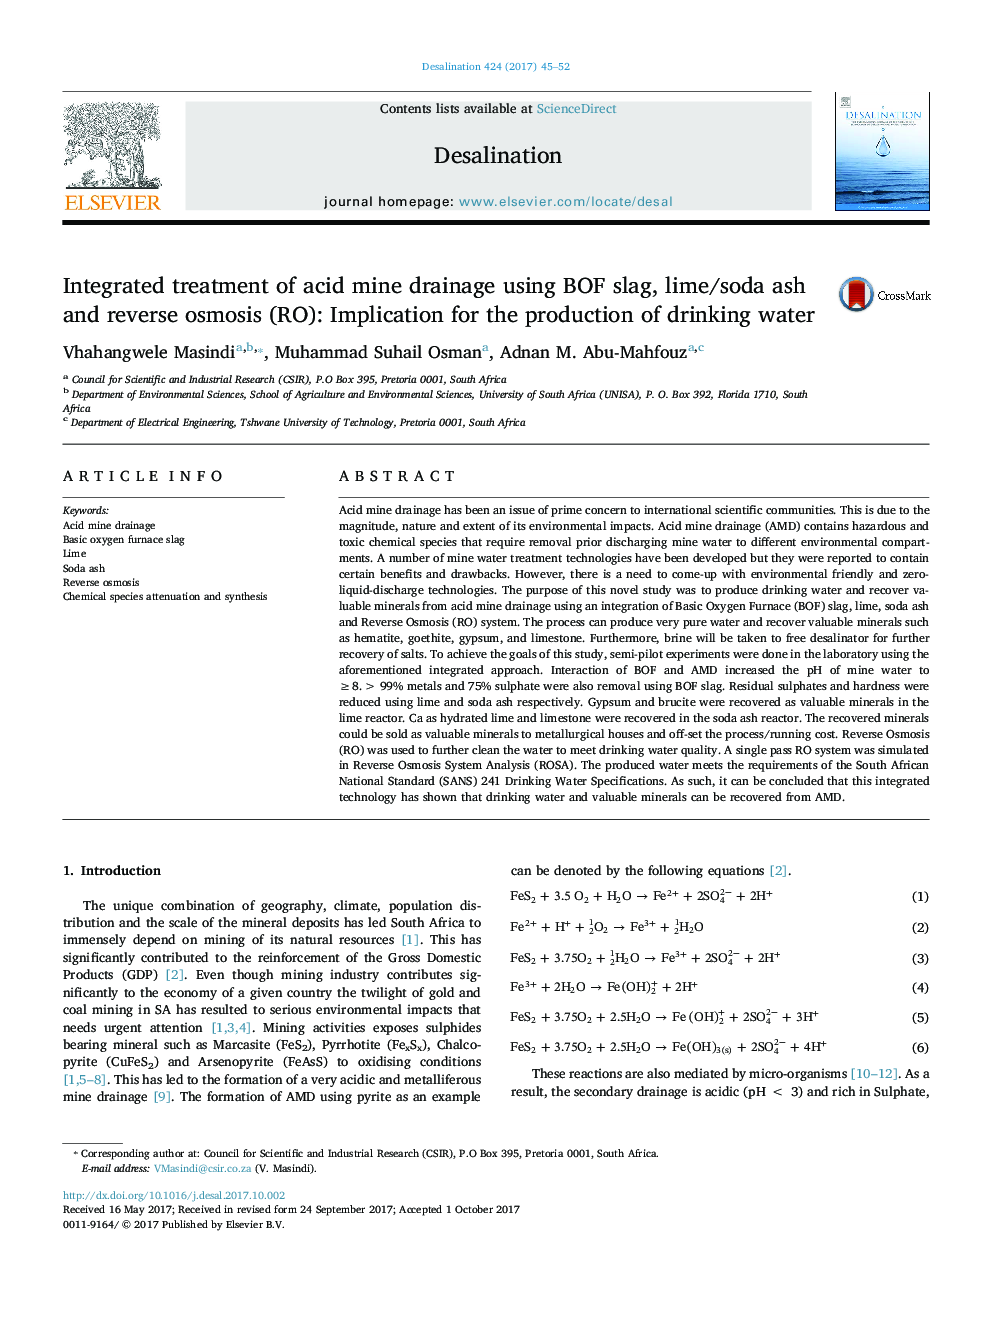 Integrated treatment of acid mine drainage using BOF slag, lime/soda ash and reverse osmosis (RO): Implication for the production of drinking water